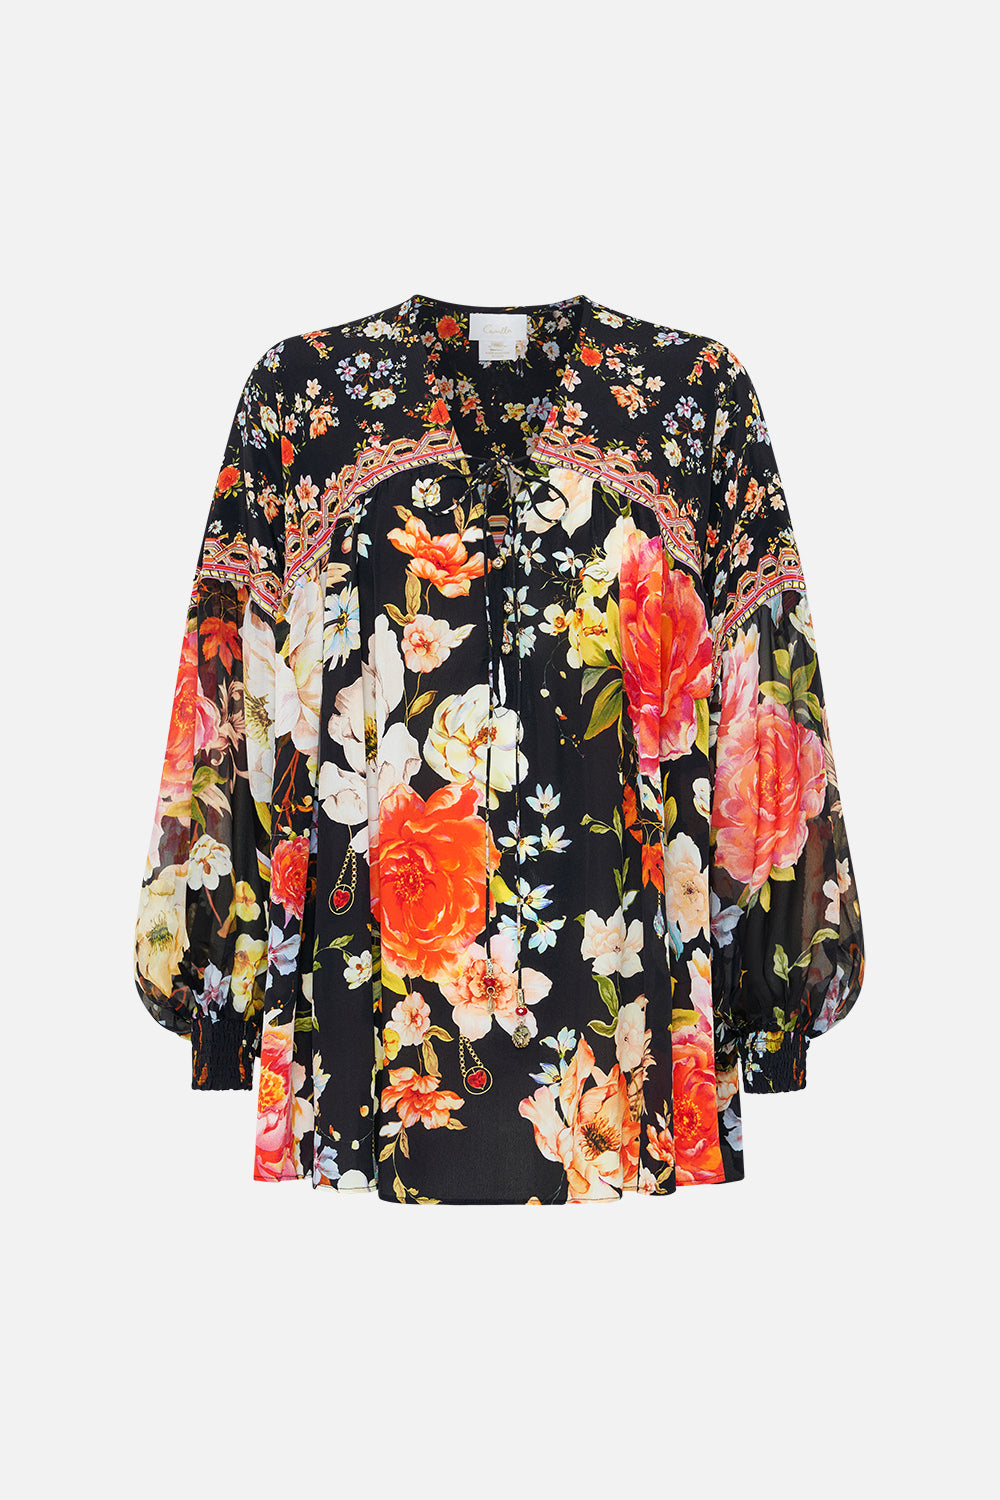 Product view of CAMILLA silk blouse in the Secret History print